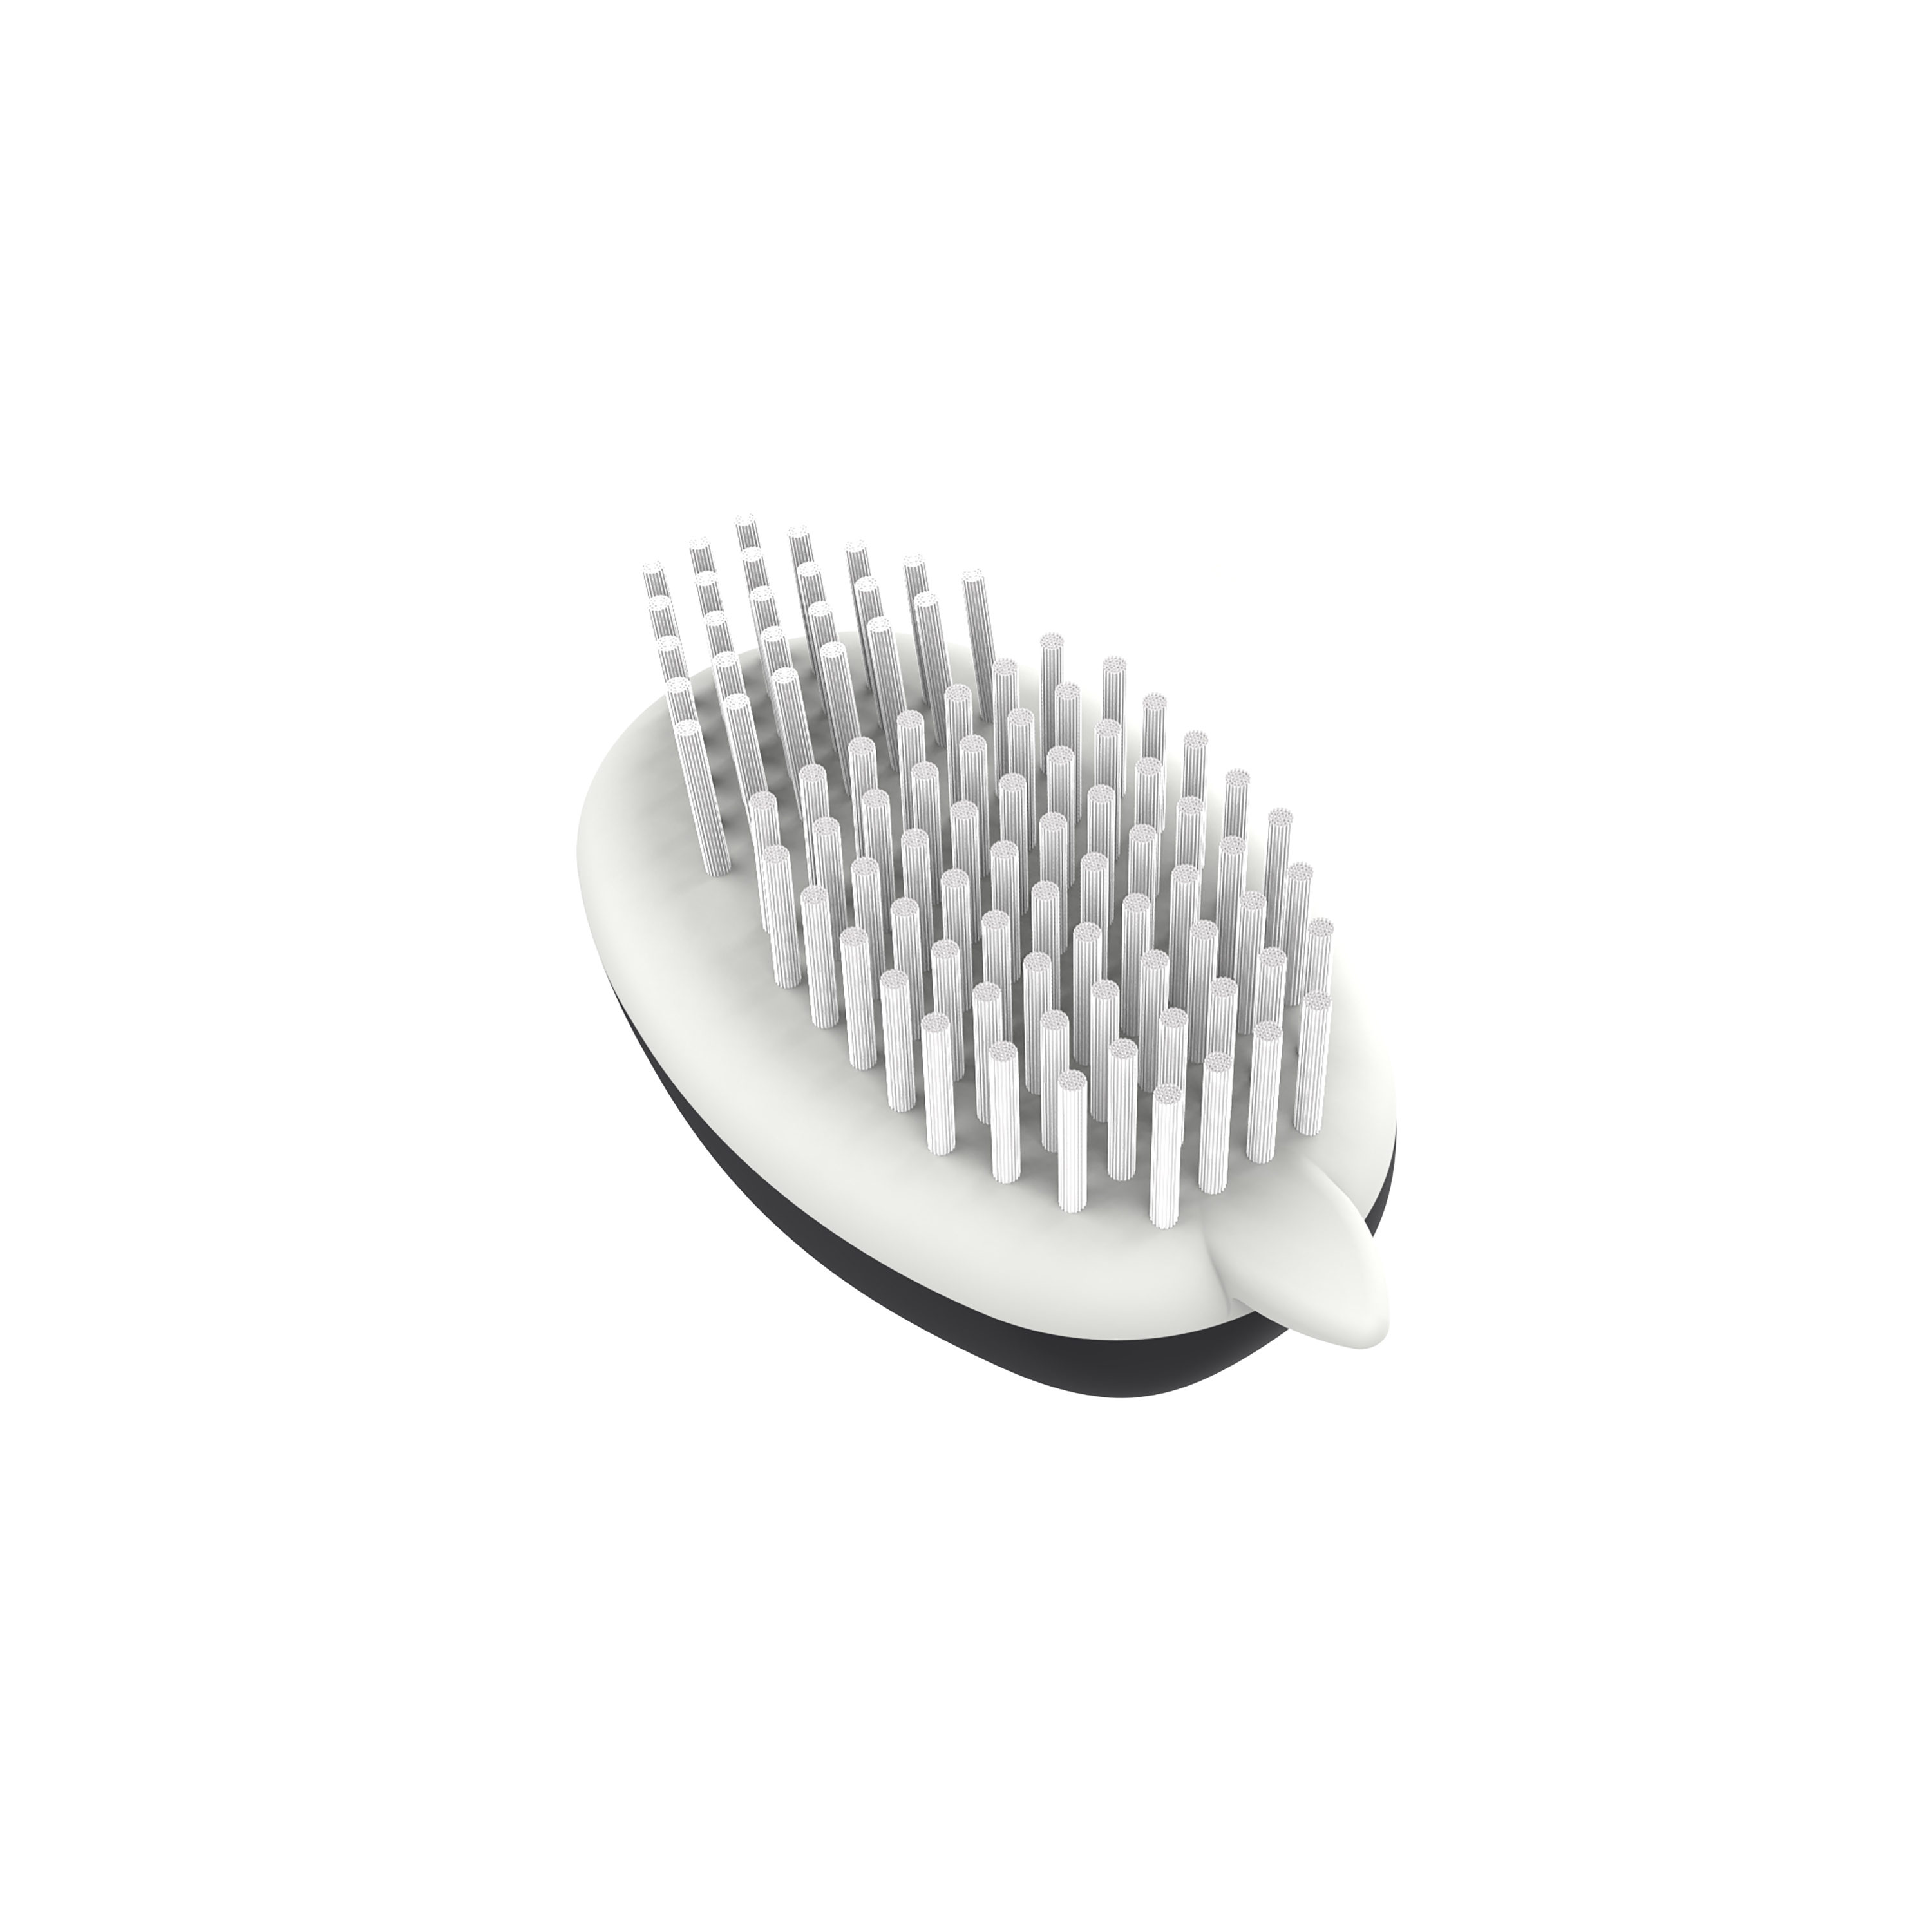 Vegetable Cleaning Brush